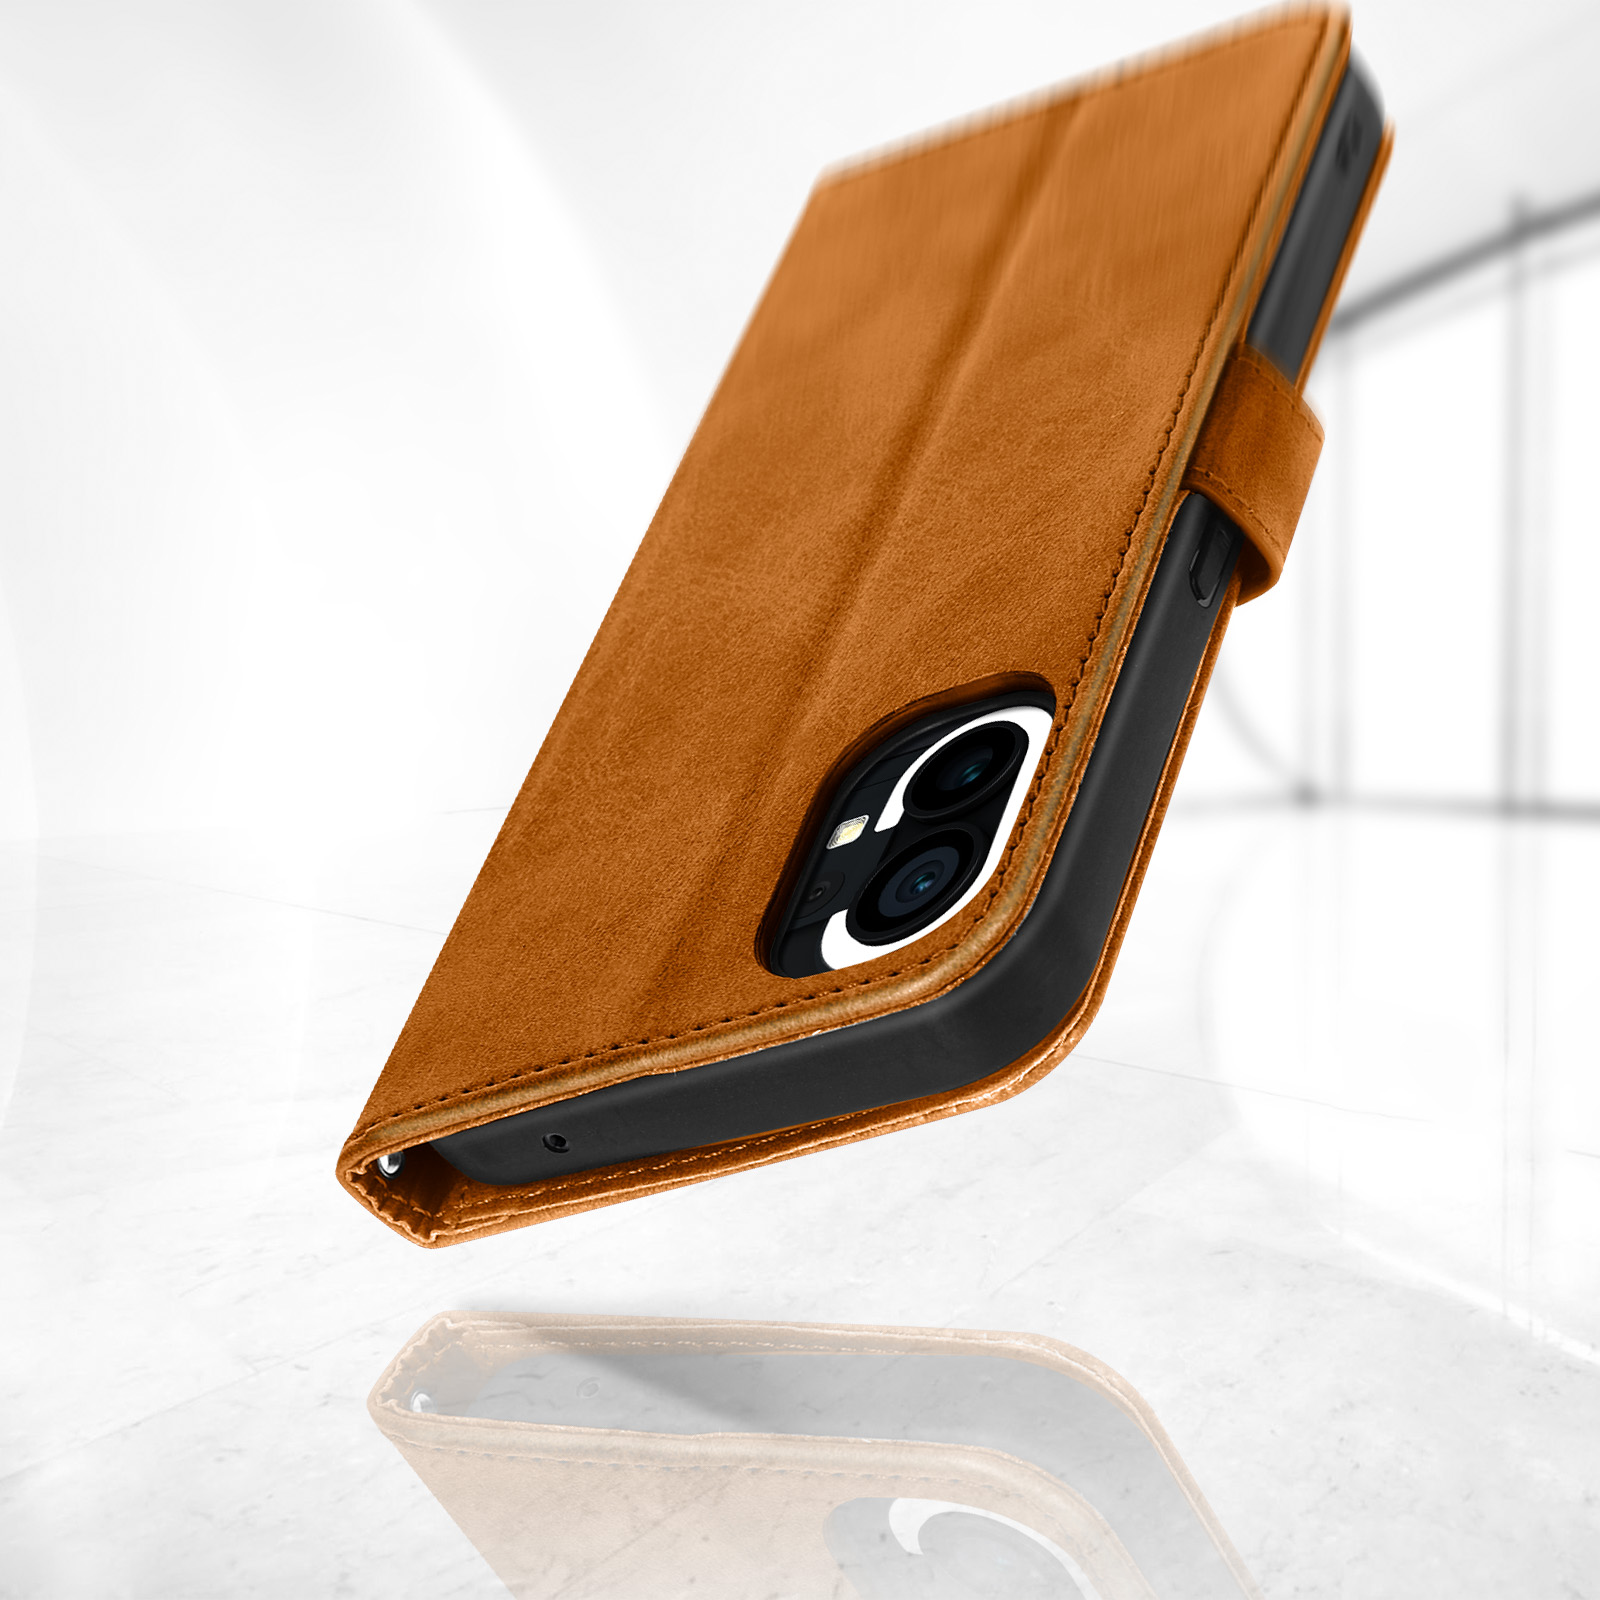 AVIZAR Bookstyle Series, Bookcover, Nothing, 1, Phone Camel